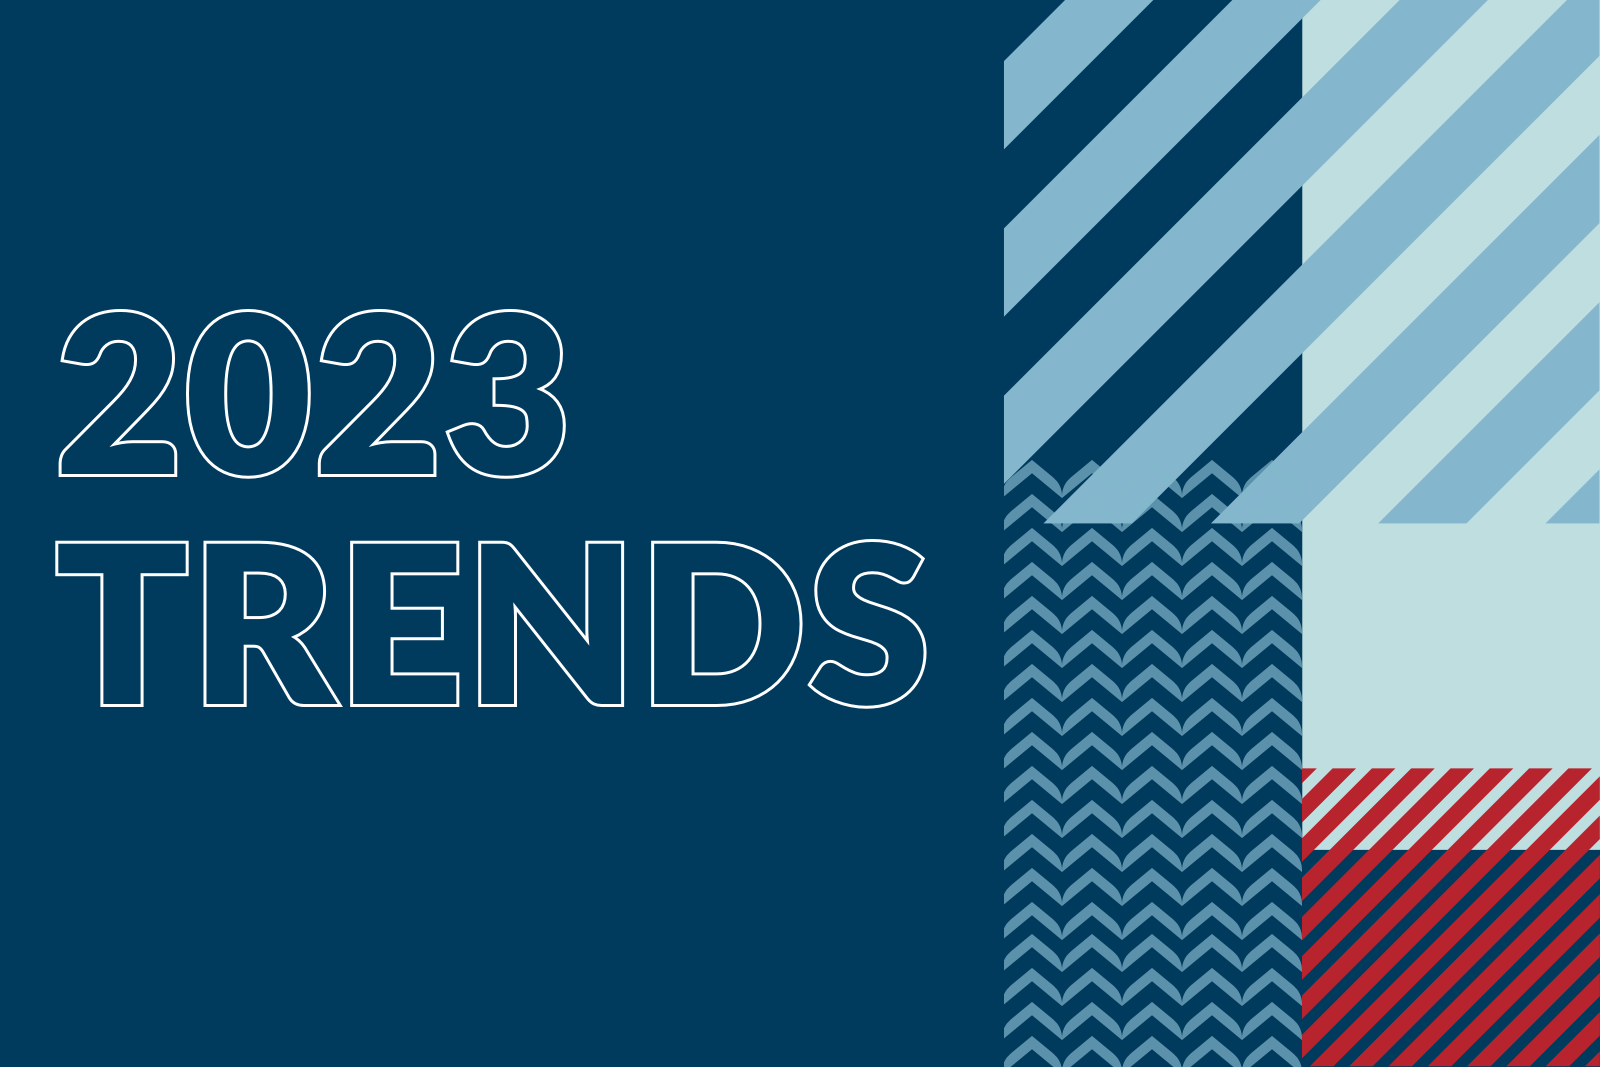 In With the New: 2023 Trends Article Featured Image